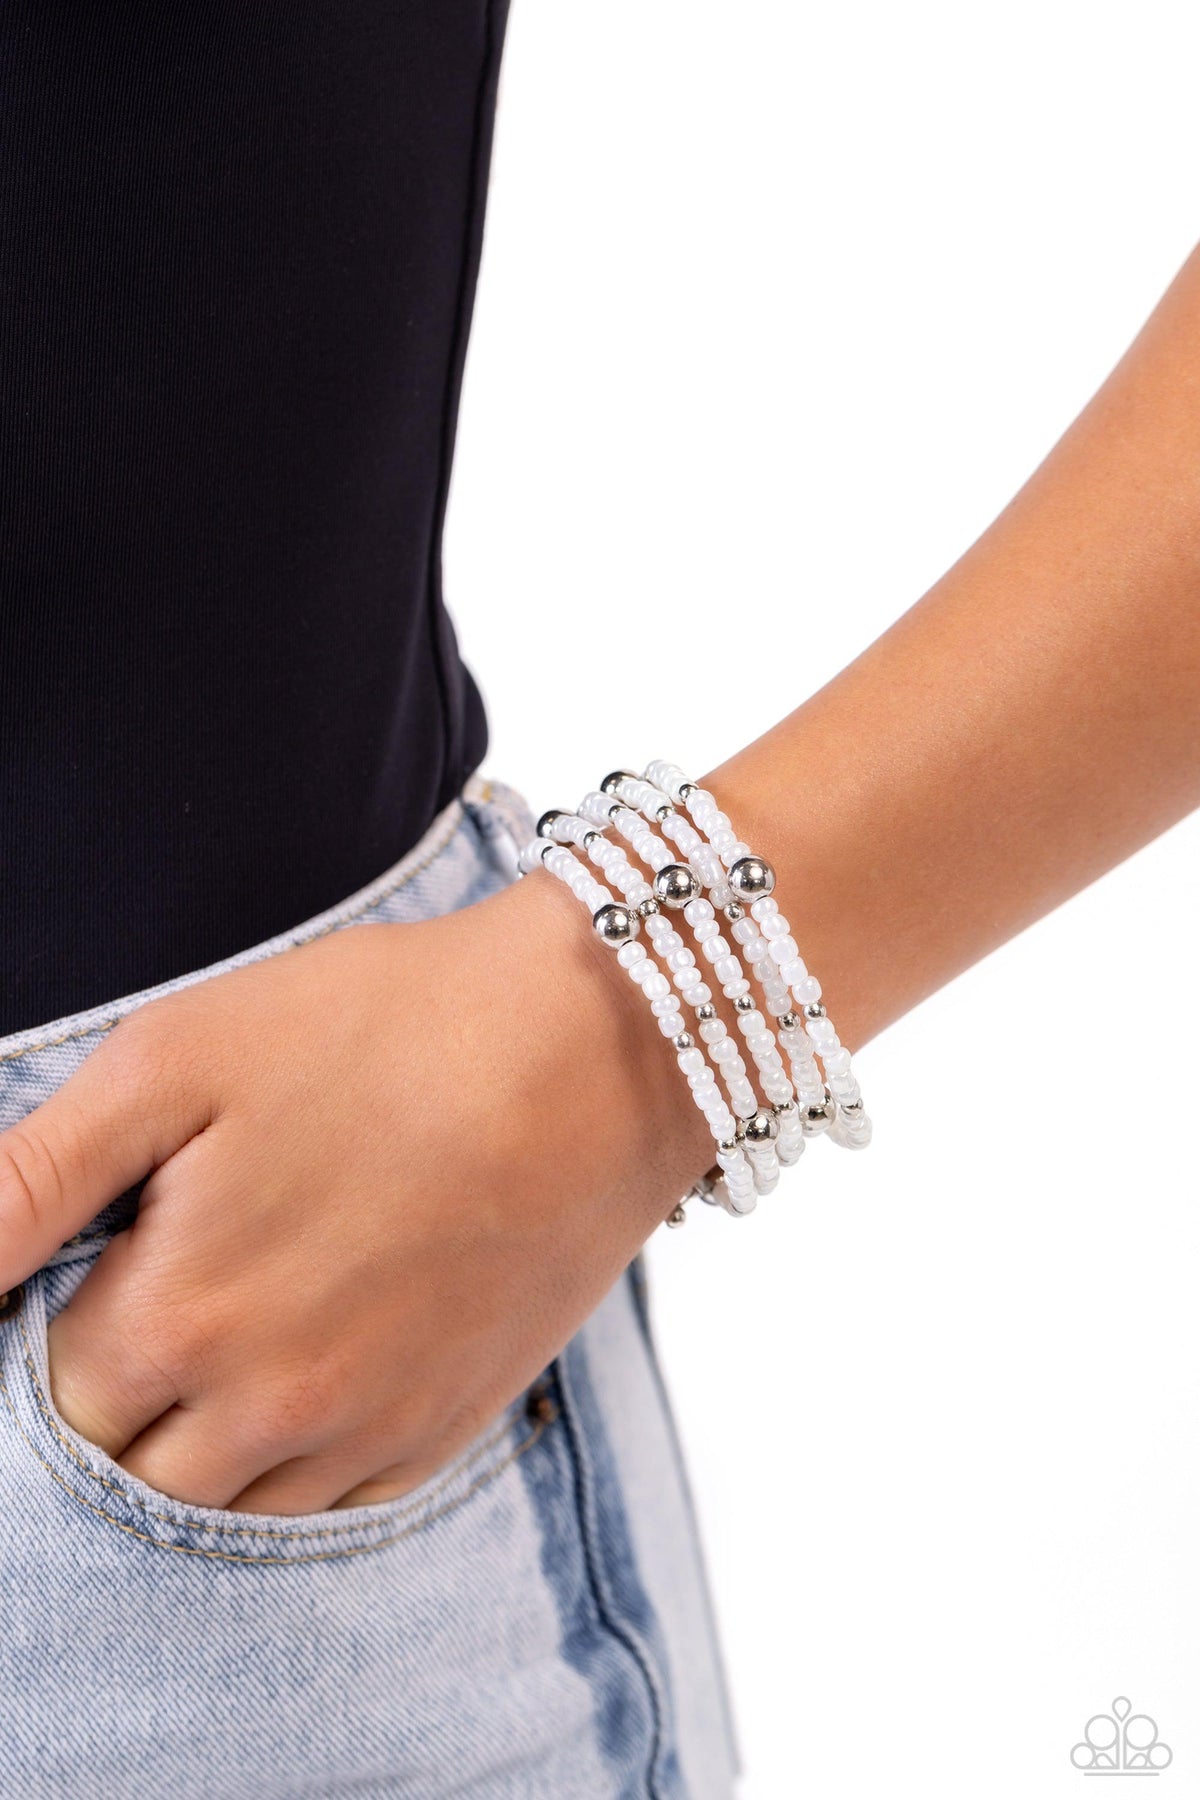 Refined Retrograde White Pearl Coil Bracelet - Paparazzi Accessories-on model - CarasShop.com - $5 Jewelry by Cara Jewels